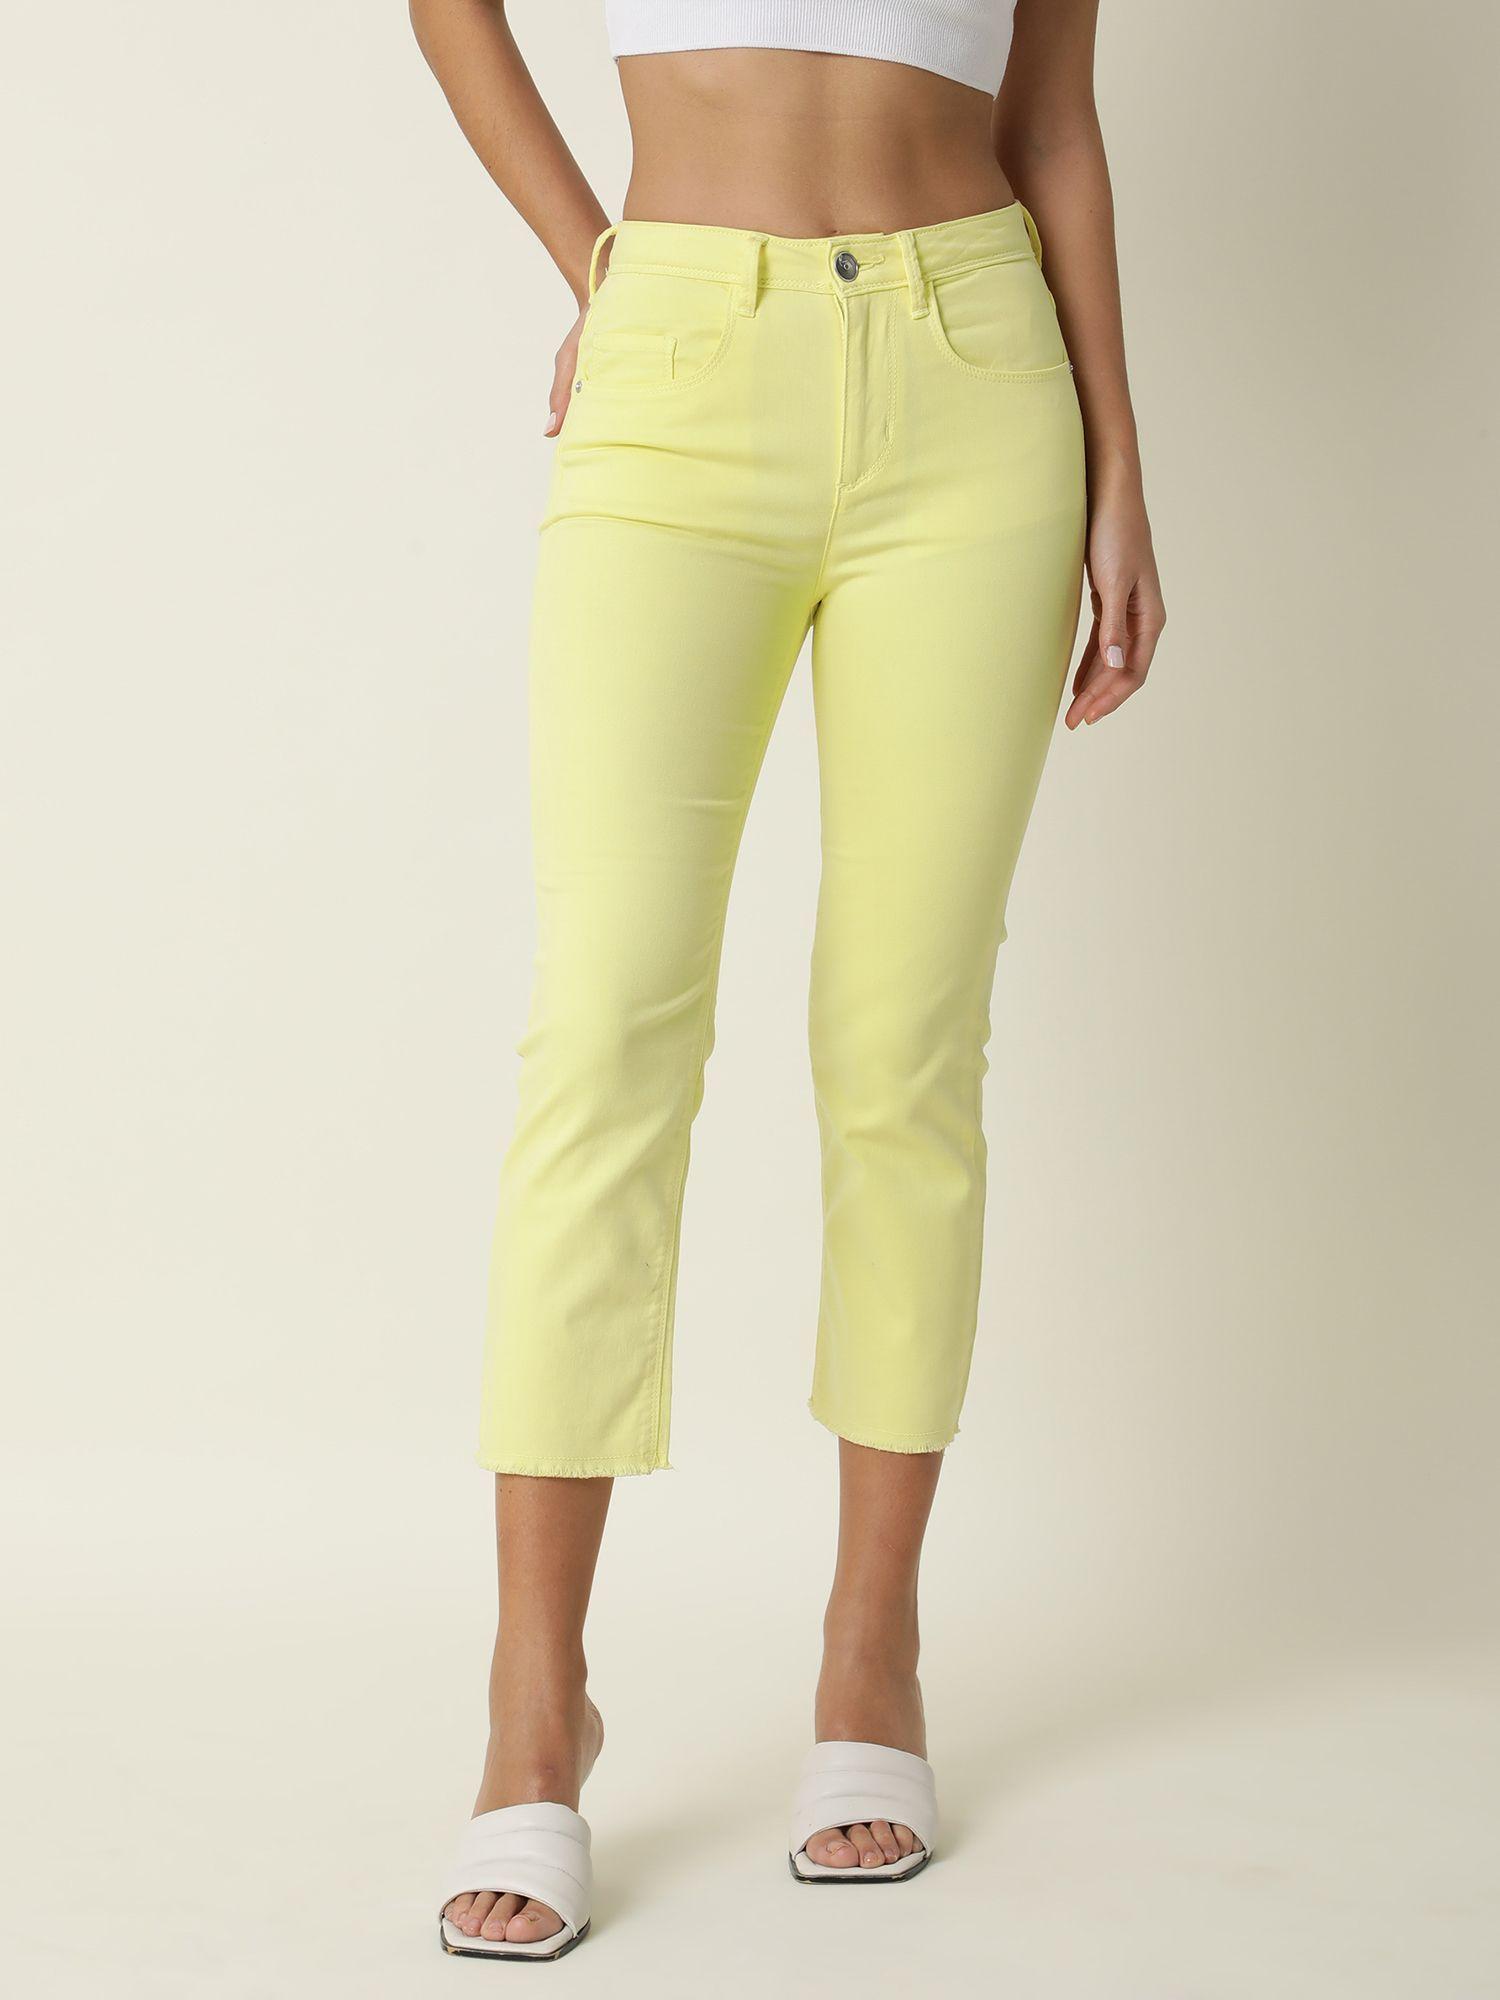 admiral yellow jeans